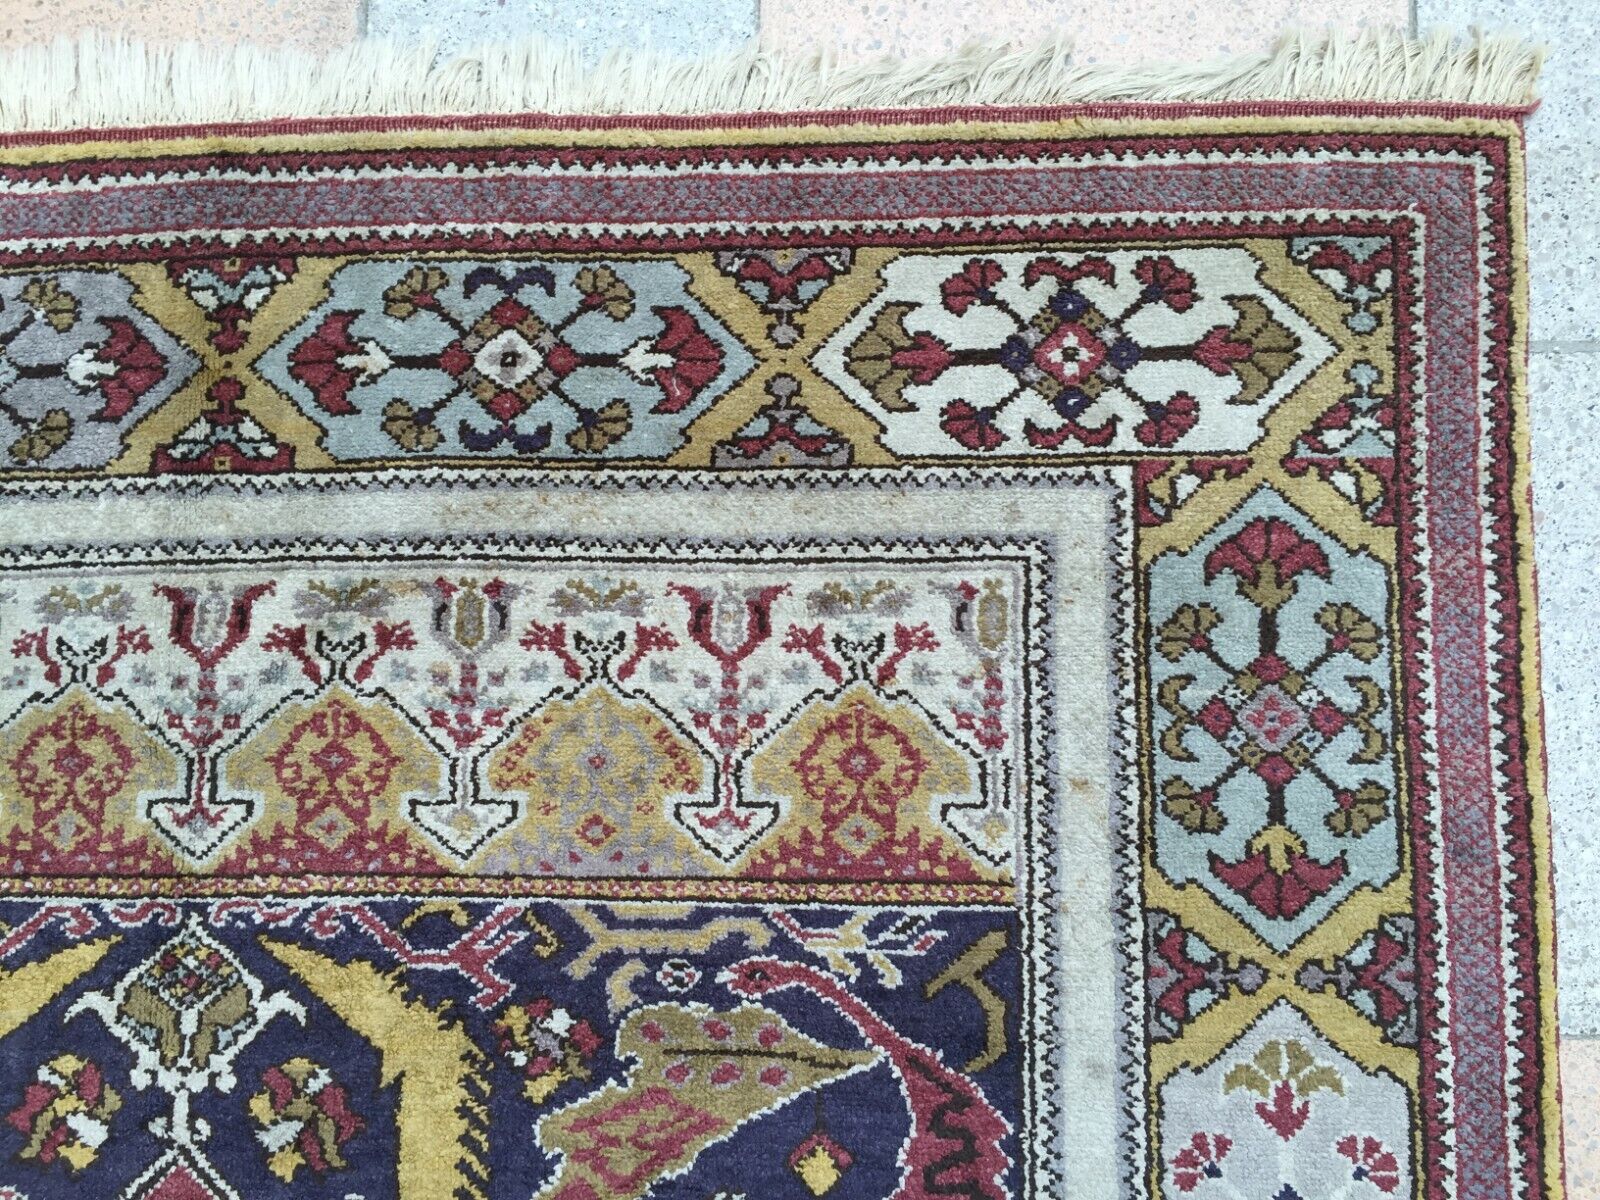 Front view of the rug hanging elegantly, capturing its full dimensions and design